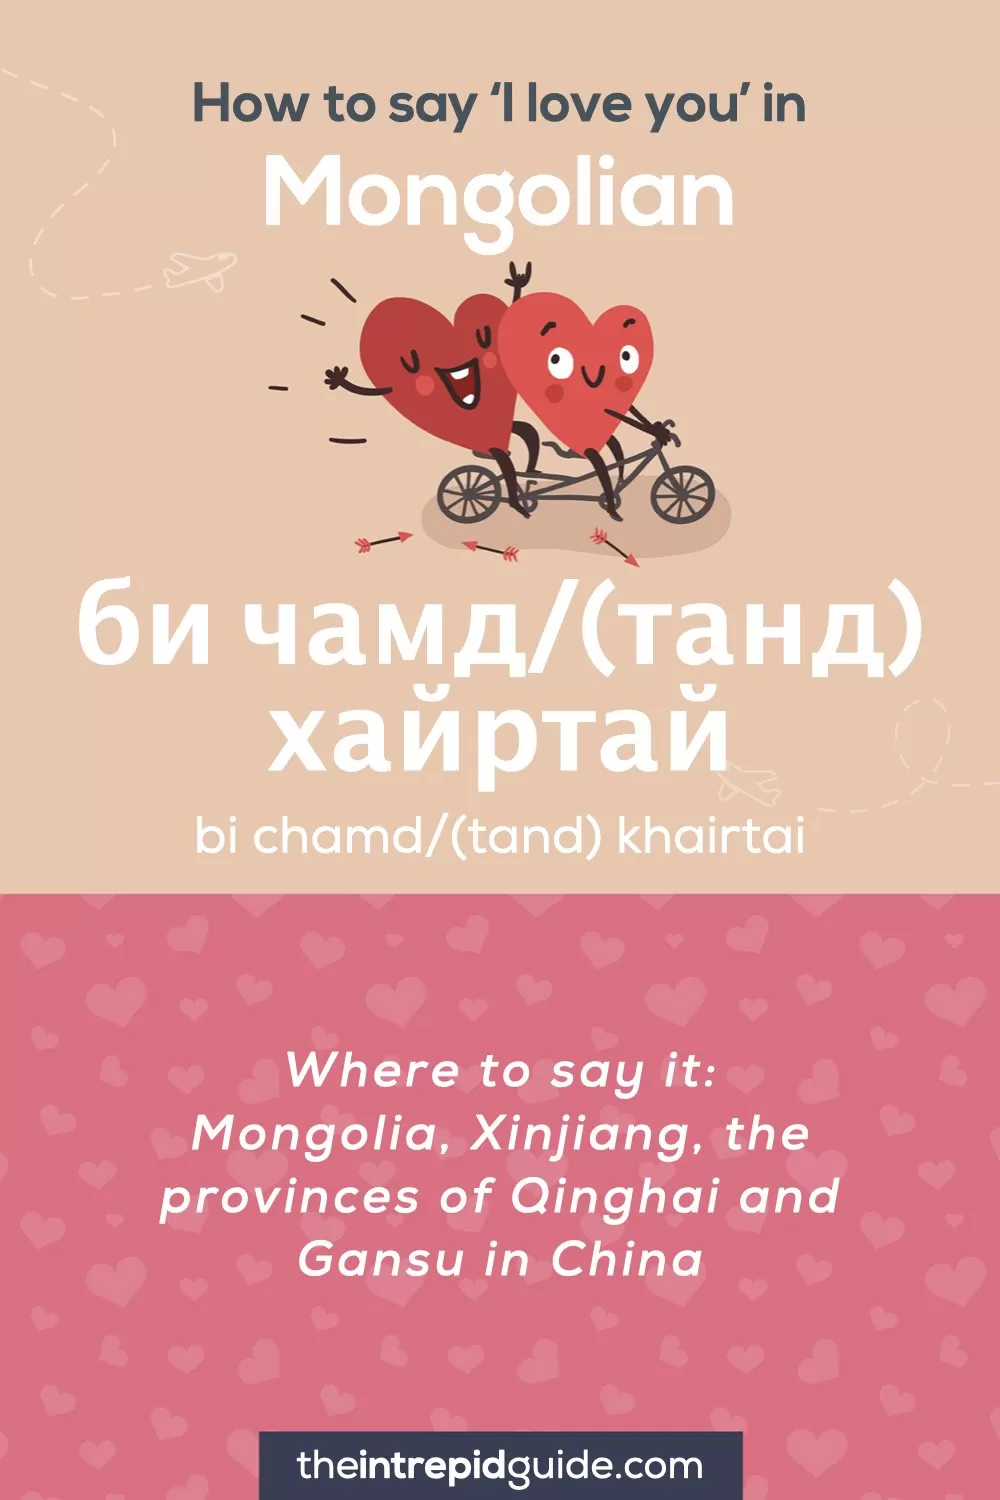 How to say I love you in different languages - Mongolian - би чамд танд хайртай